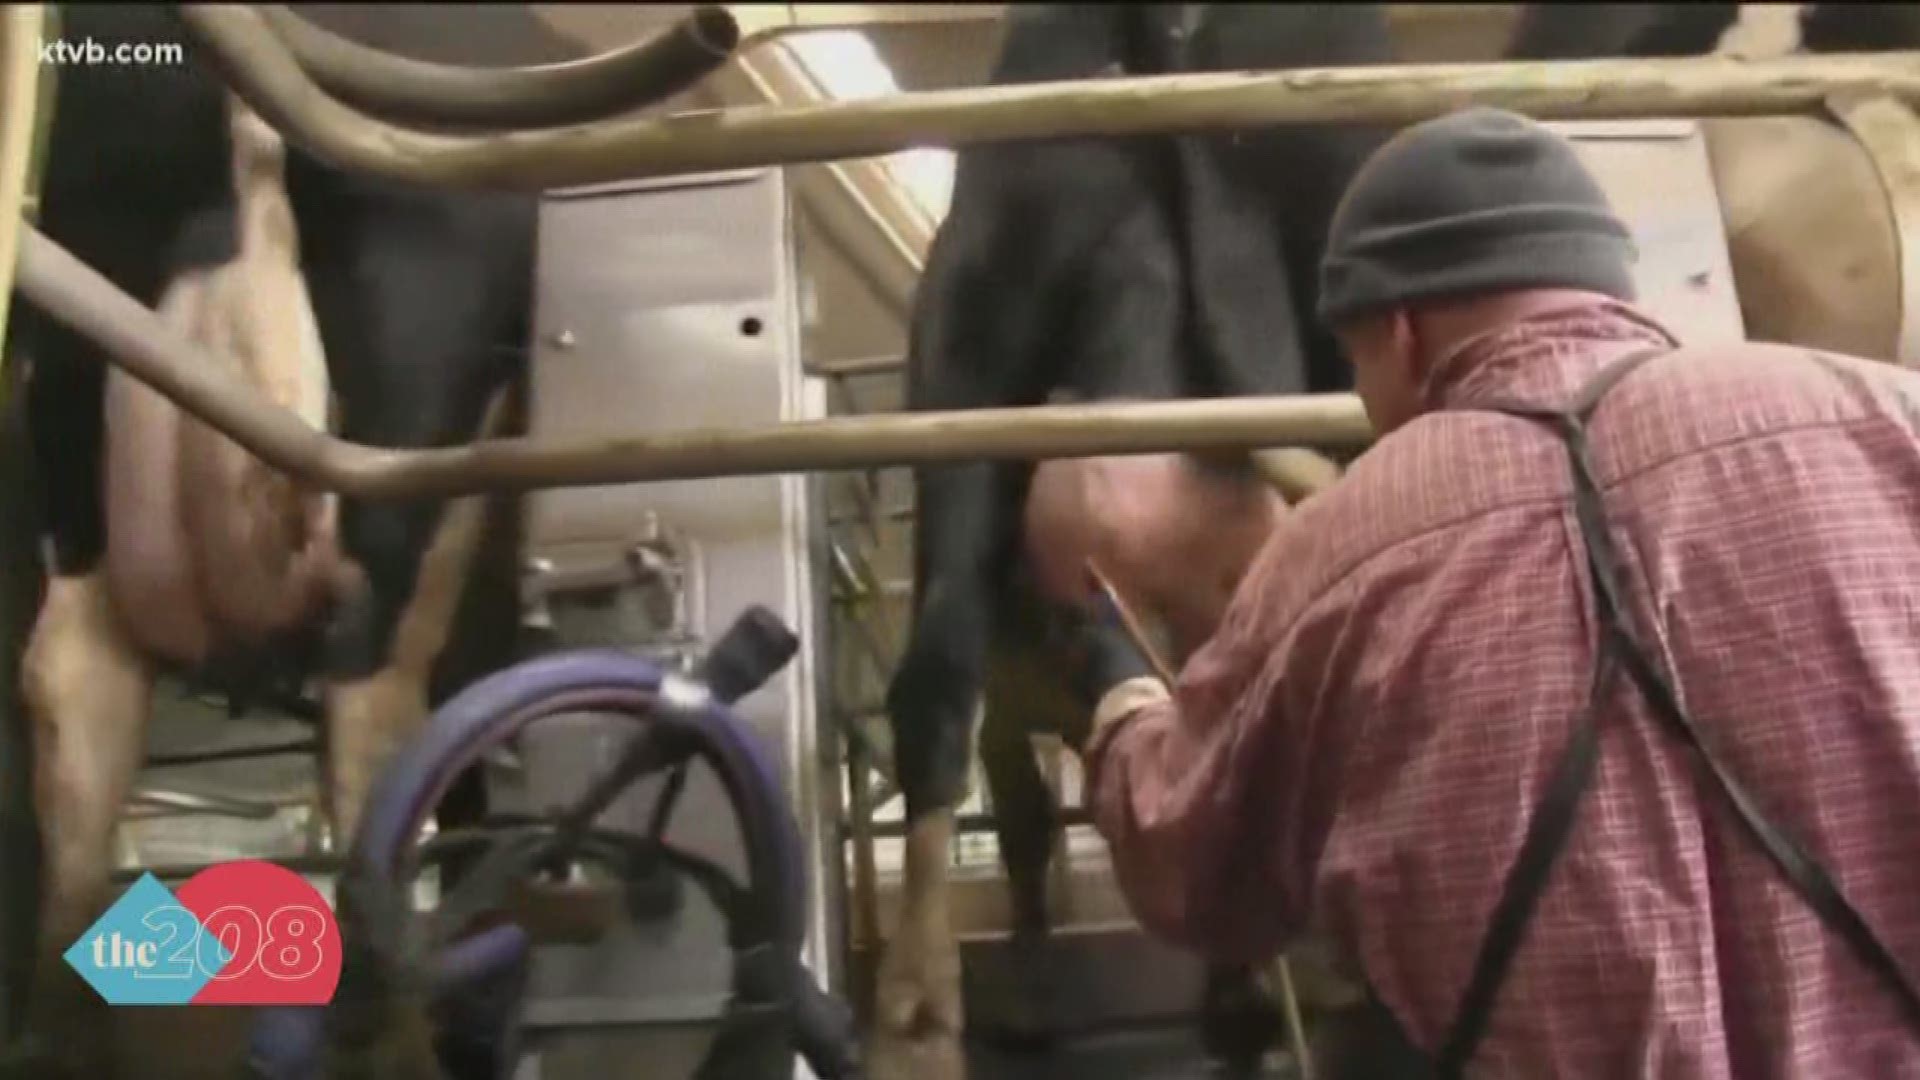 Idaho dairymen are struggling right now due to a significant drop in the price of milk over the past few weeks.